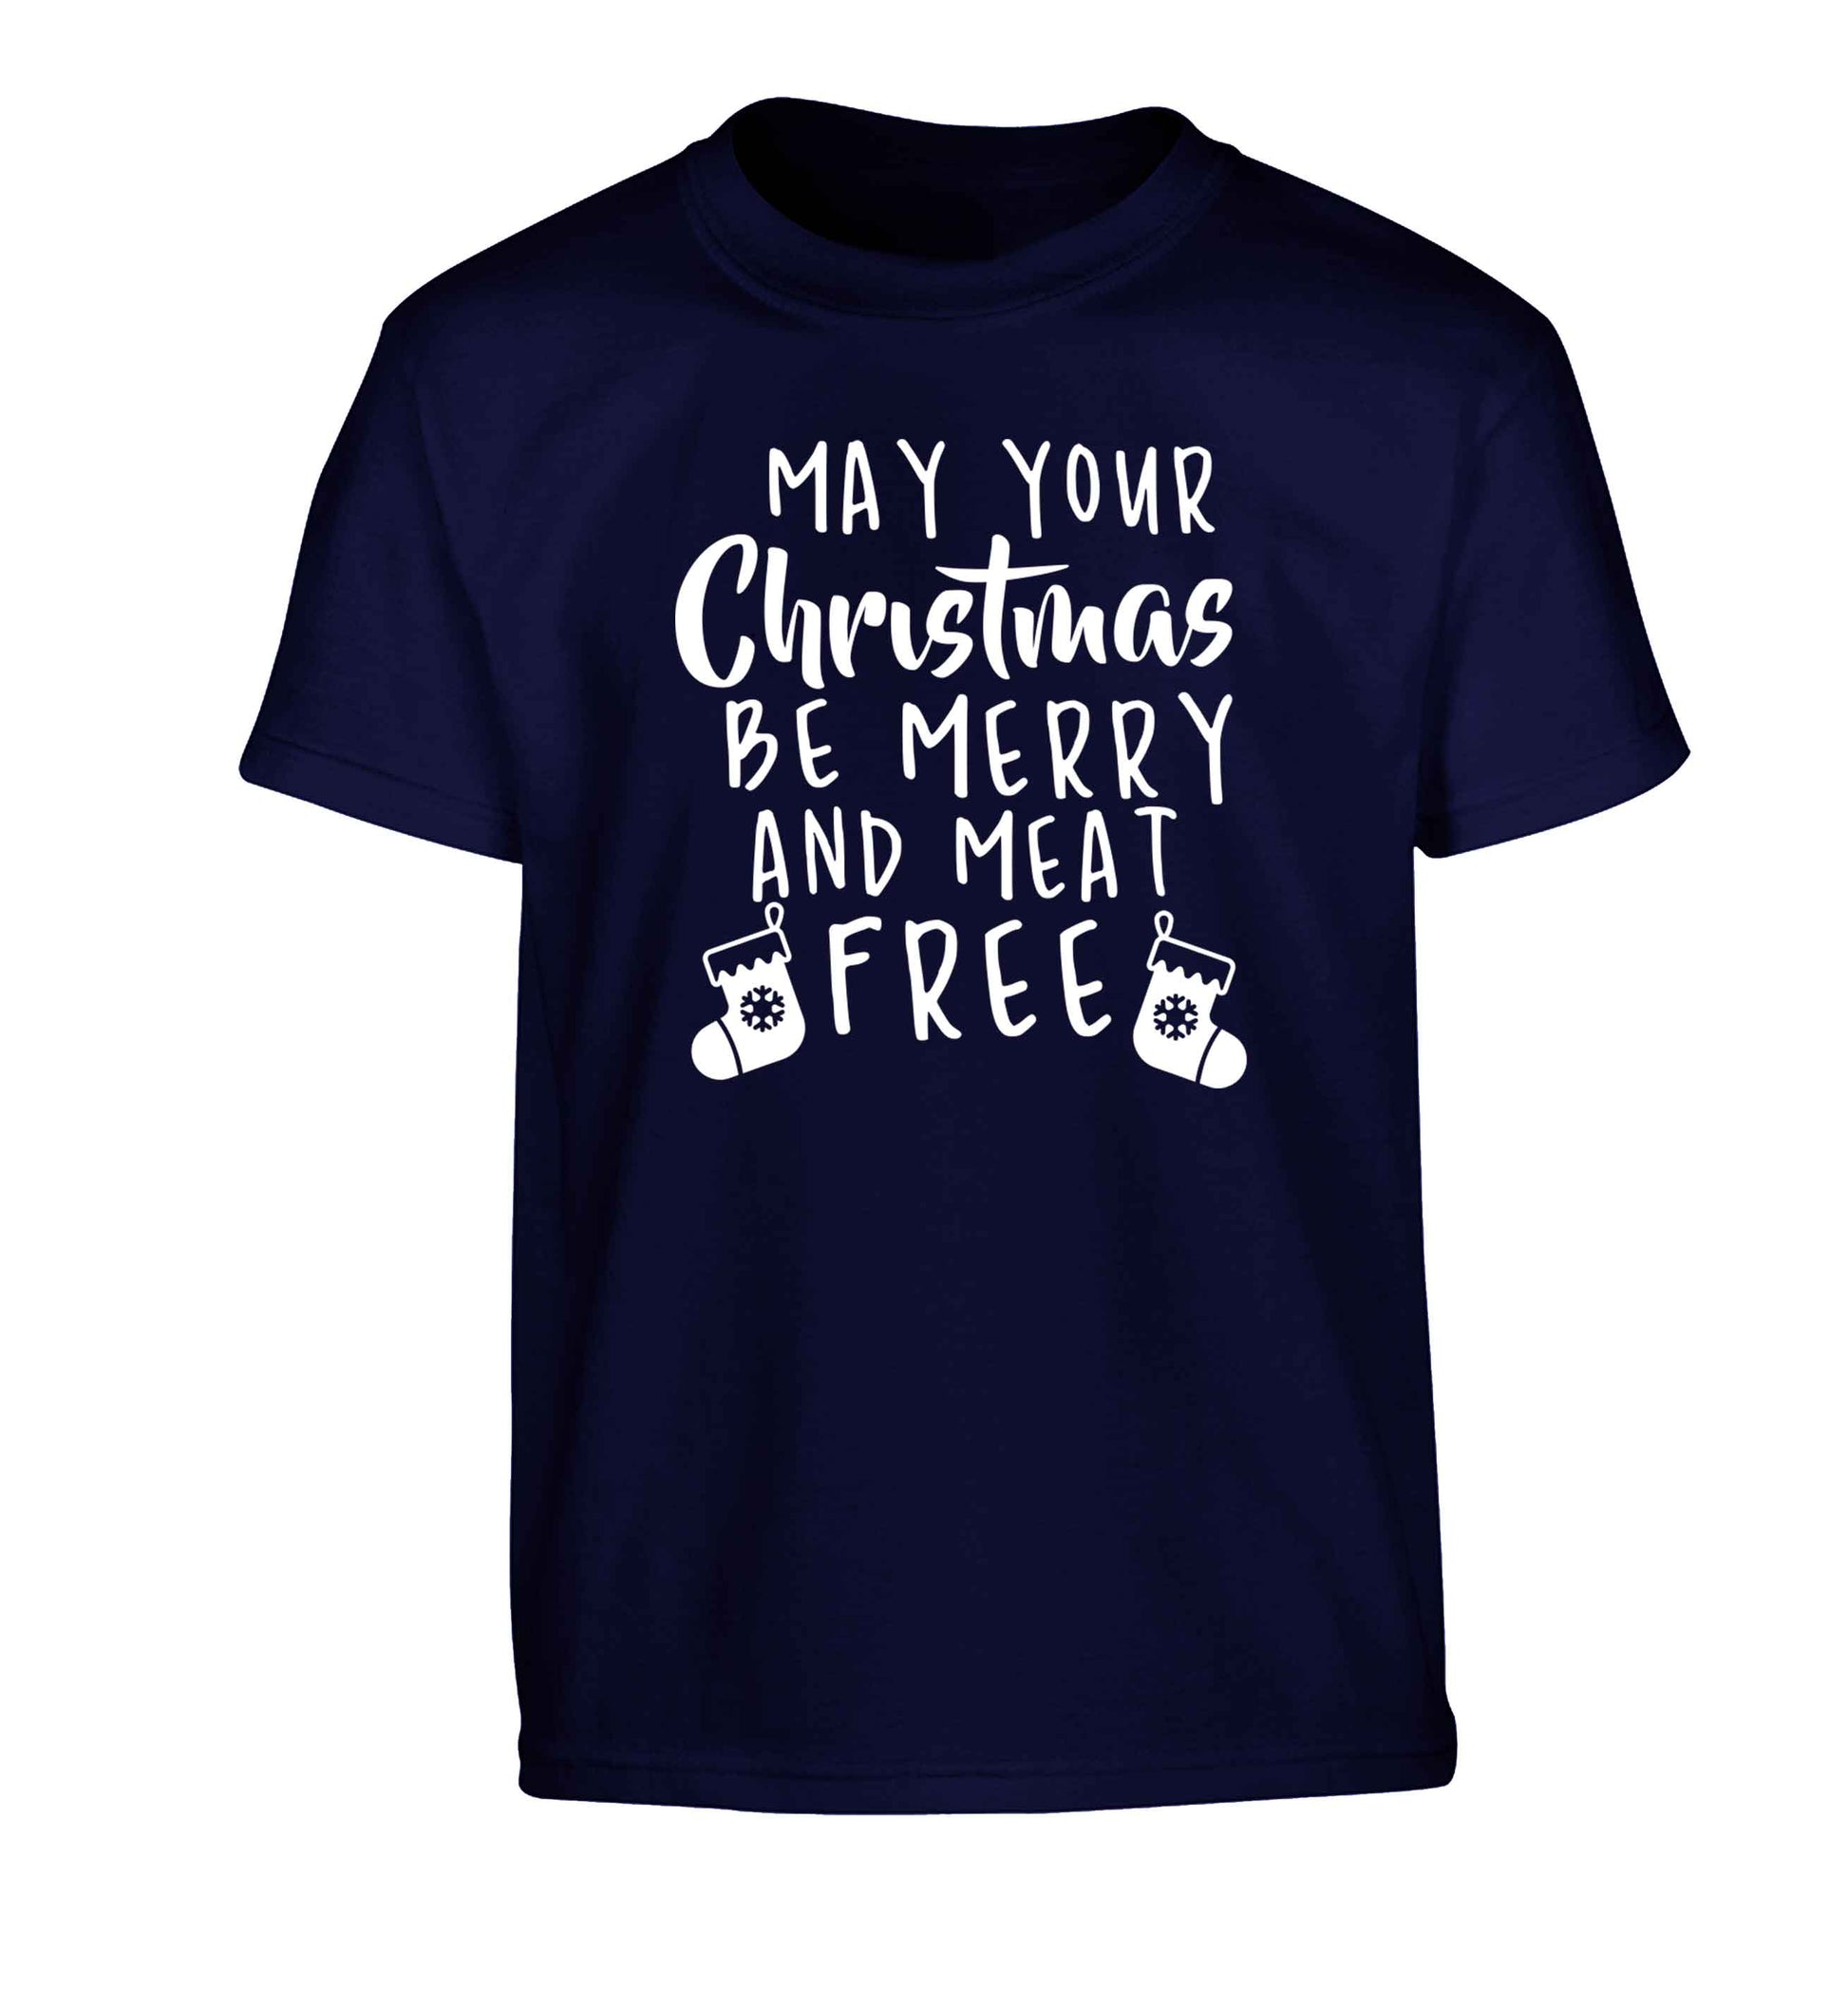 May your Christmas be merry and meat free Children's navy Tshirt 12-13 Years